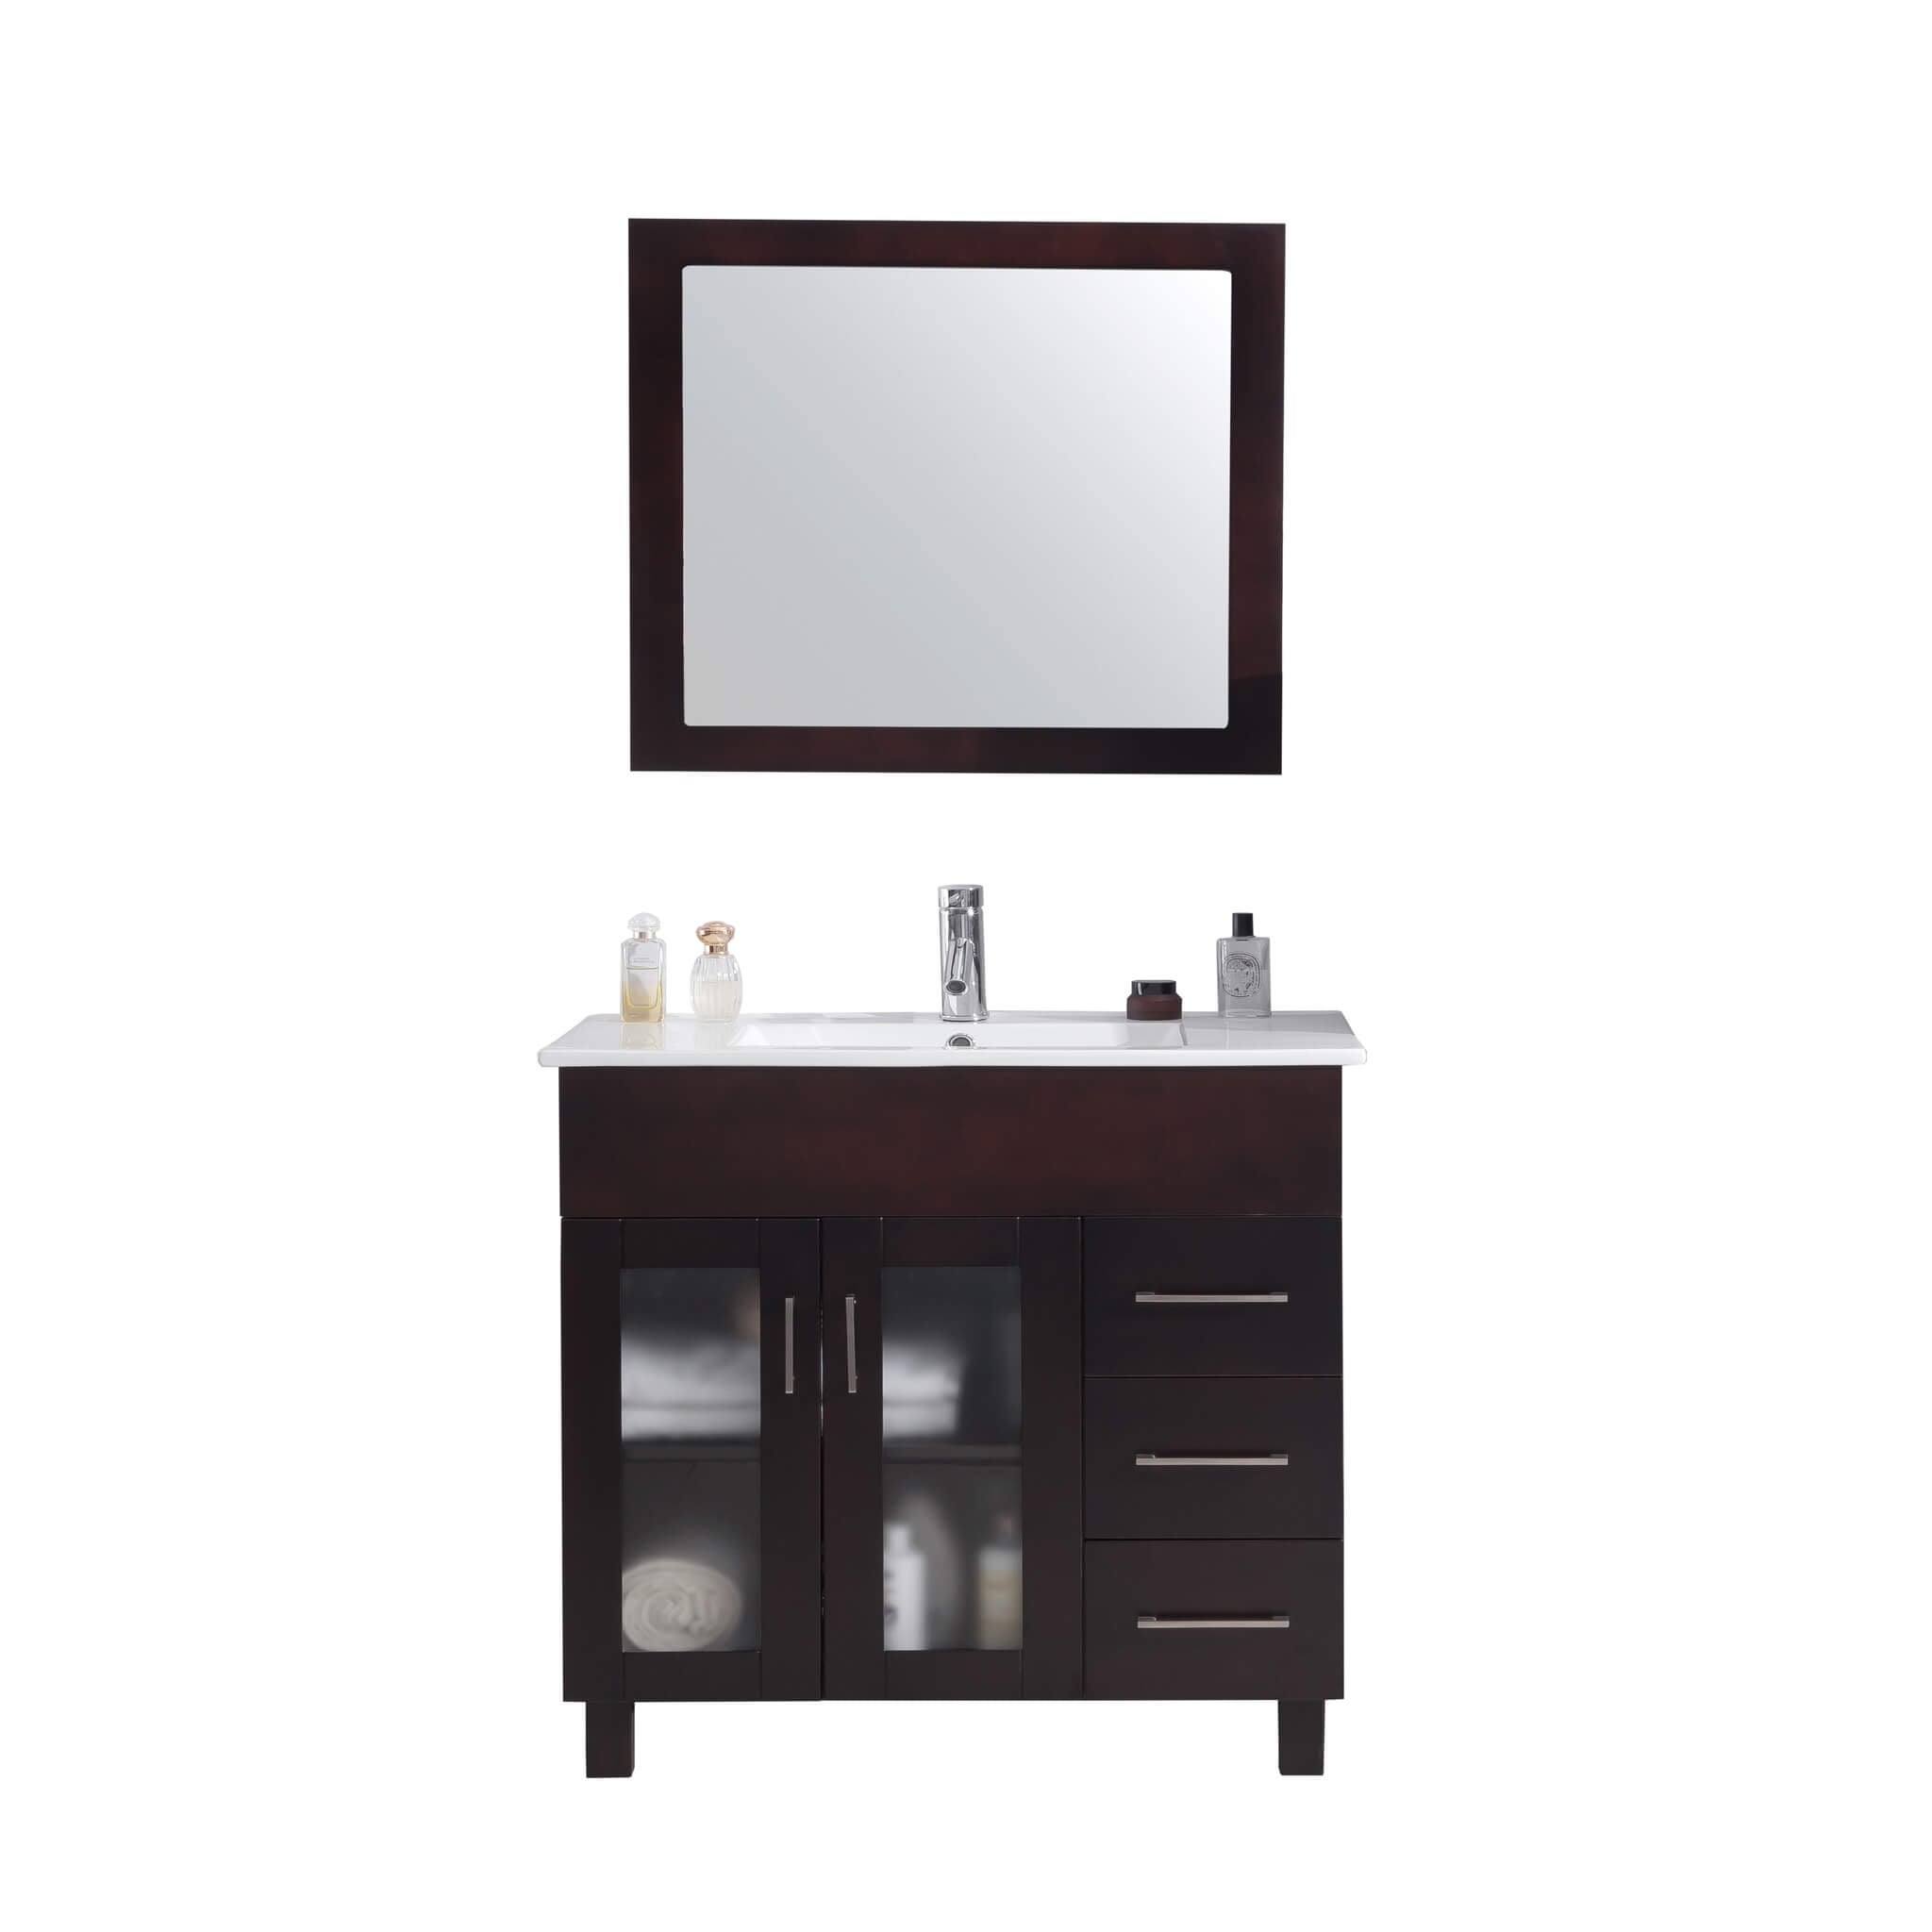 LAVIVA Nova 31321529-36B-CB 36" Single Bathroom Vanity in Brown with Ceramic Top and Integrated Sink, Front View